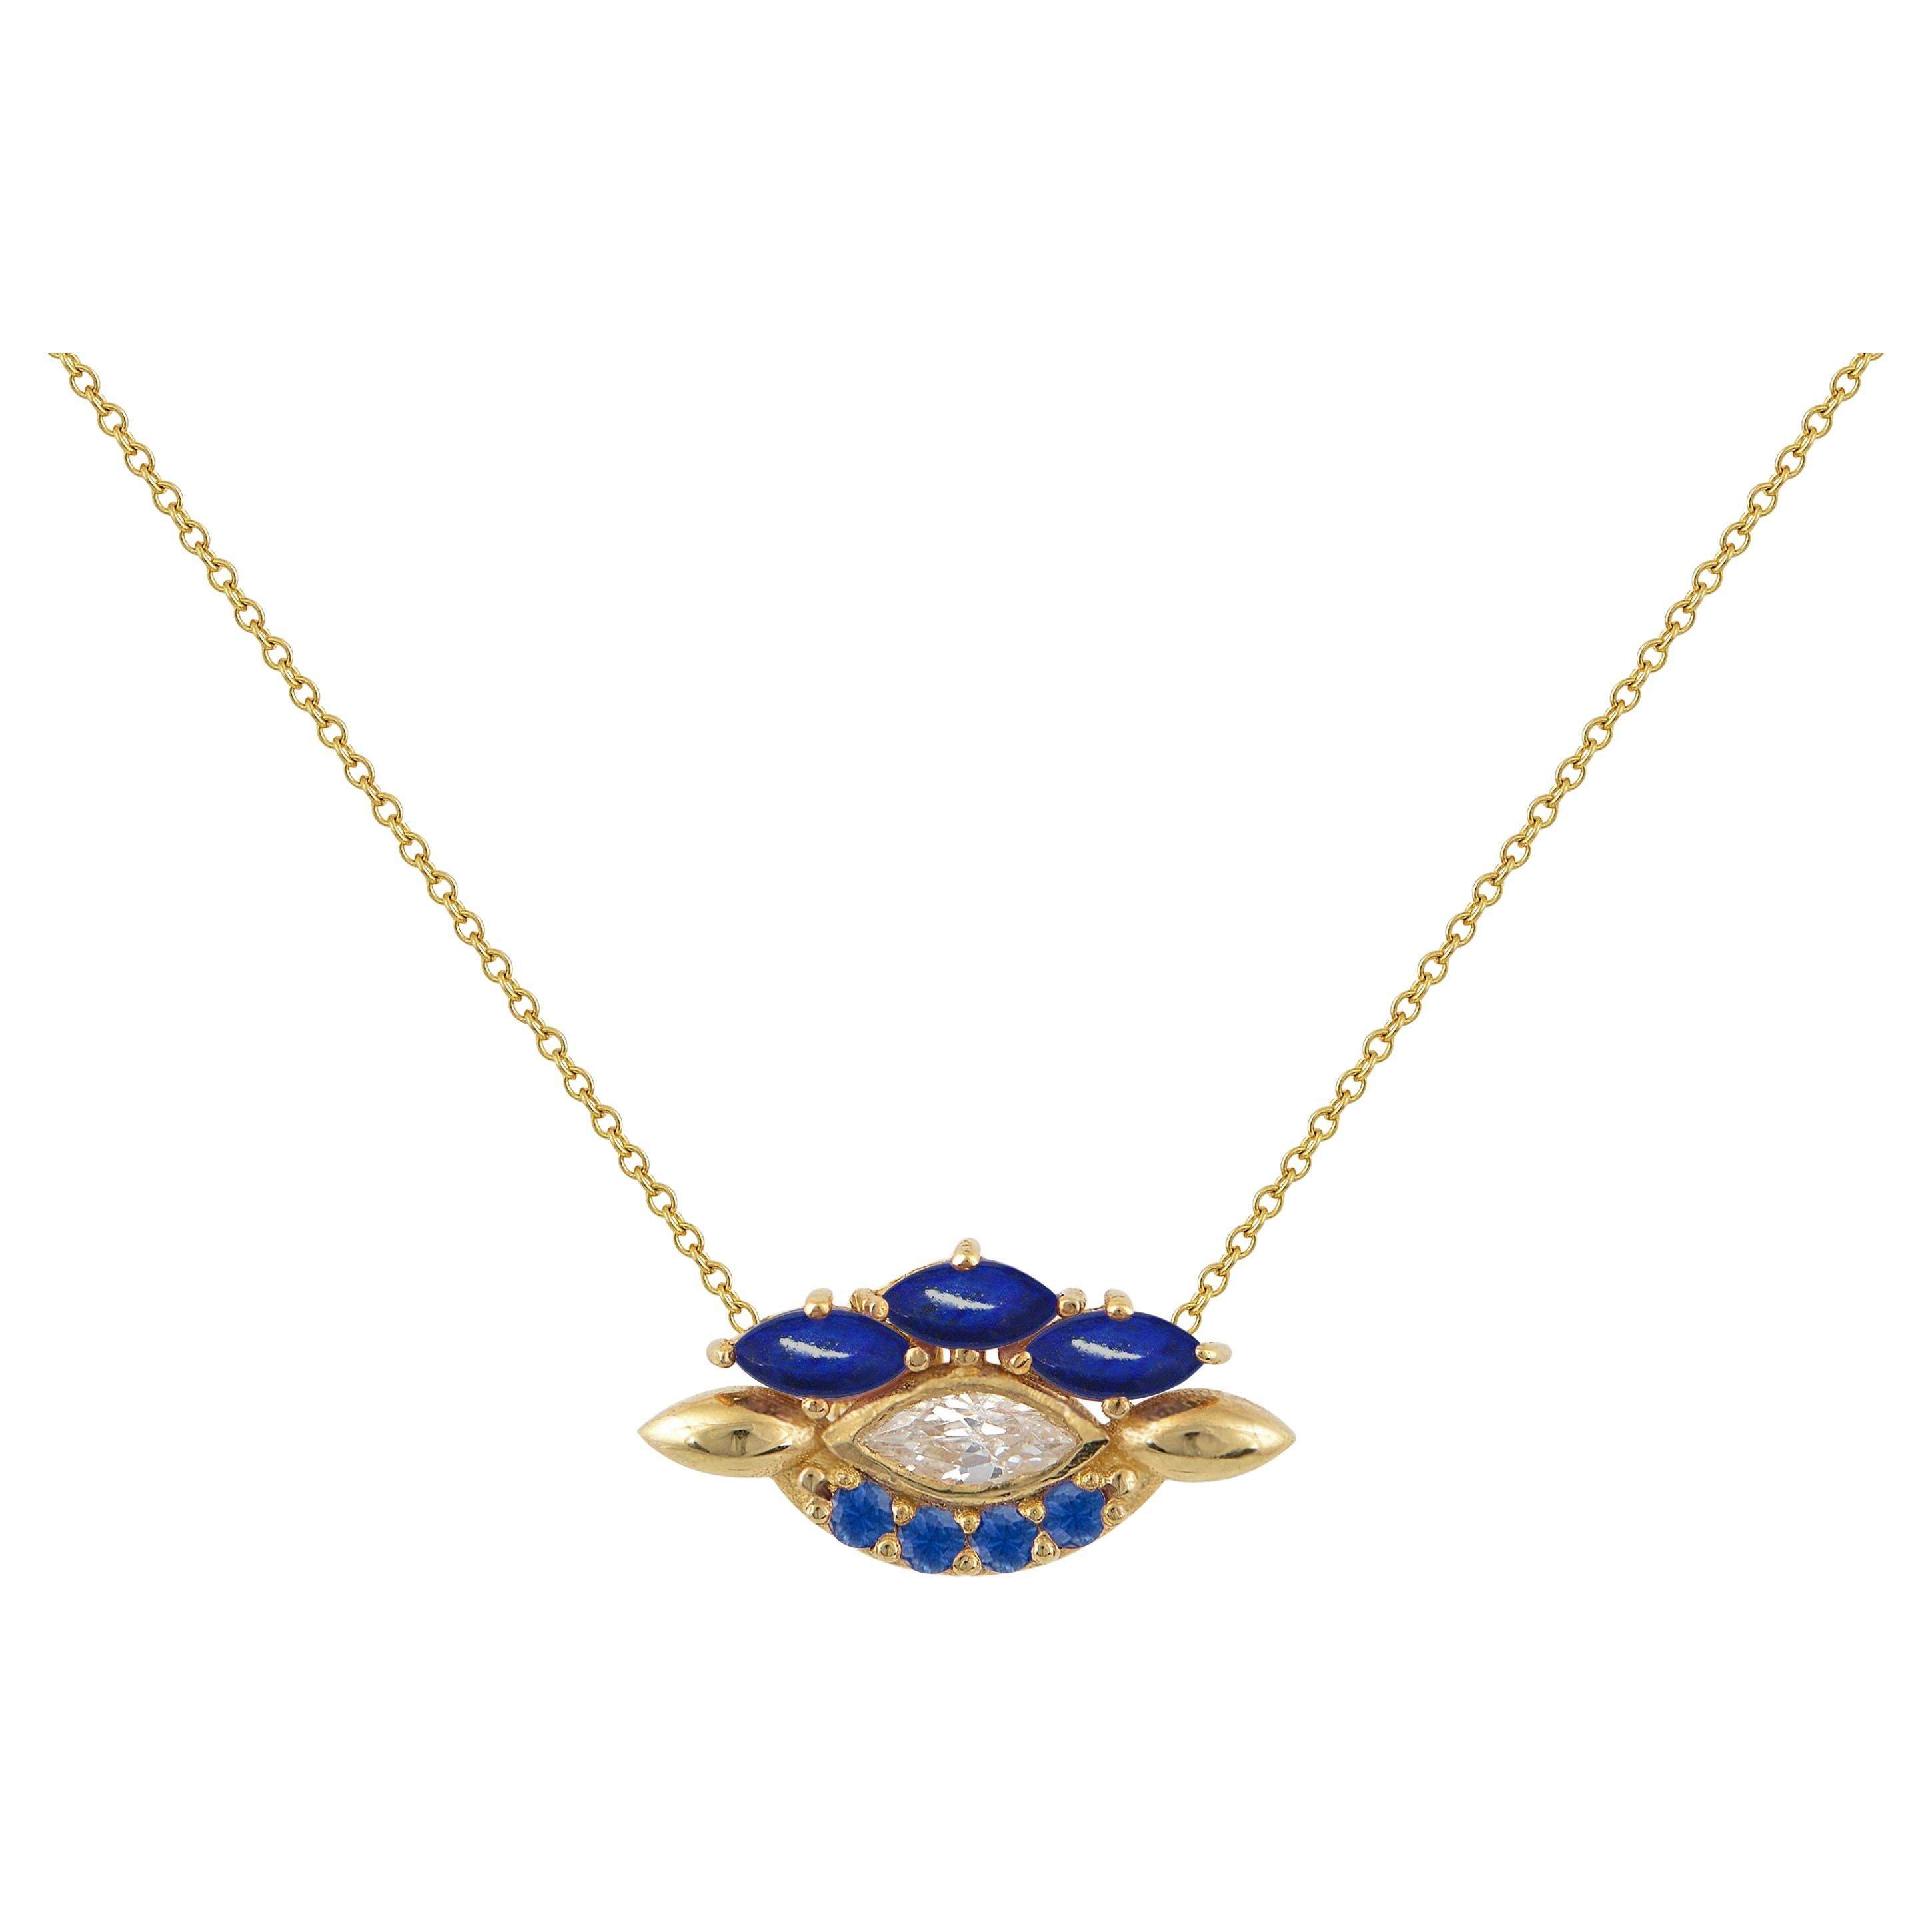 Eye Pendant in 18 Karat Yellow Gold With A Diamond, Lapis And Sapphires